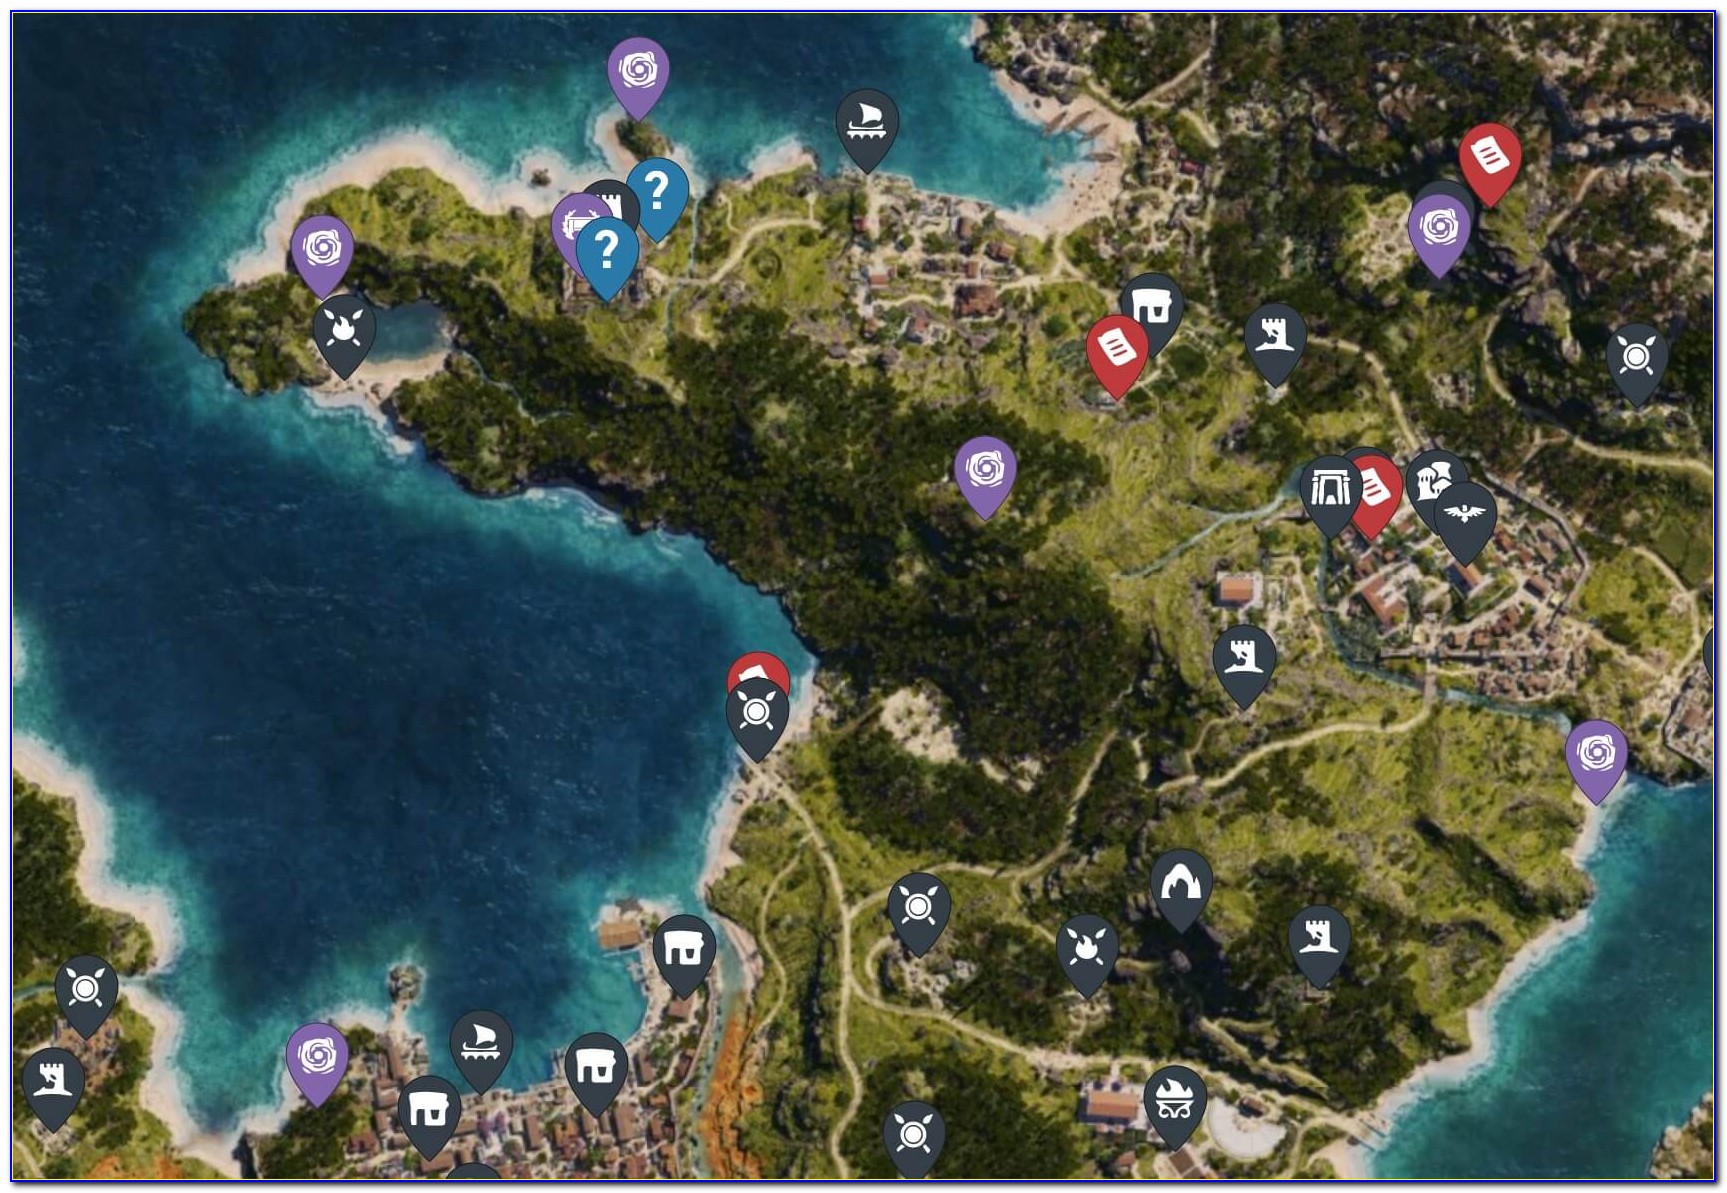 Ign Assassin's Creed Odyssey Interactive Map